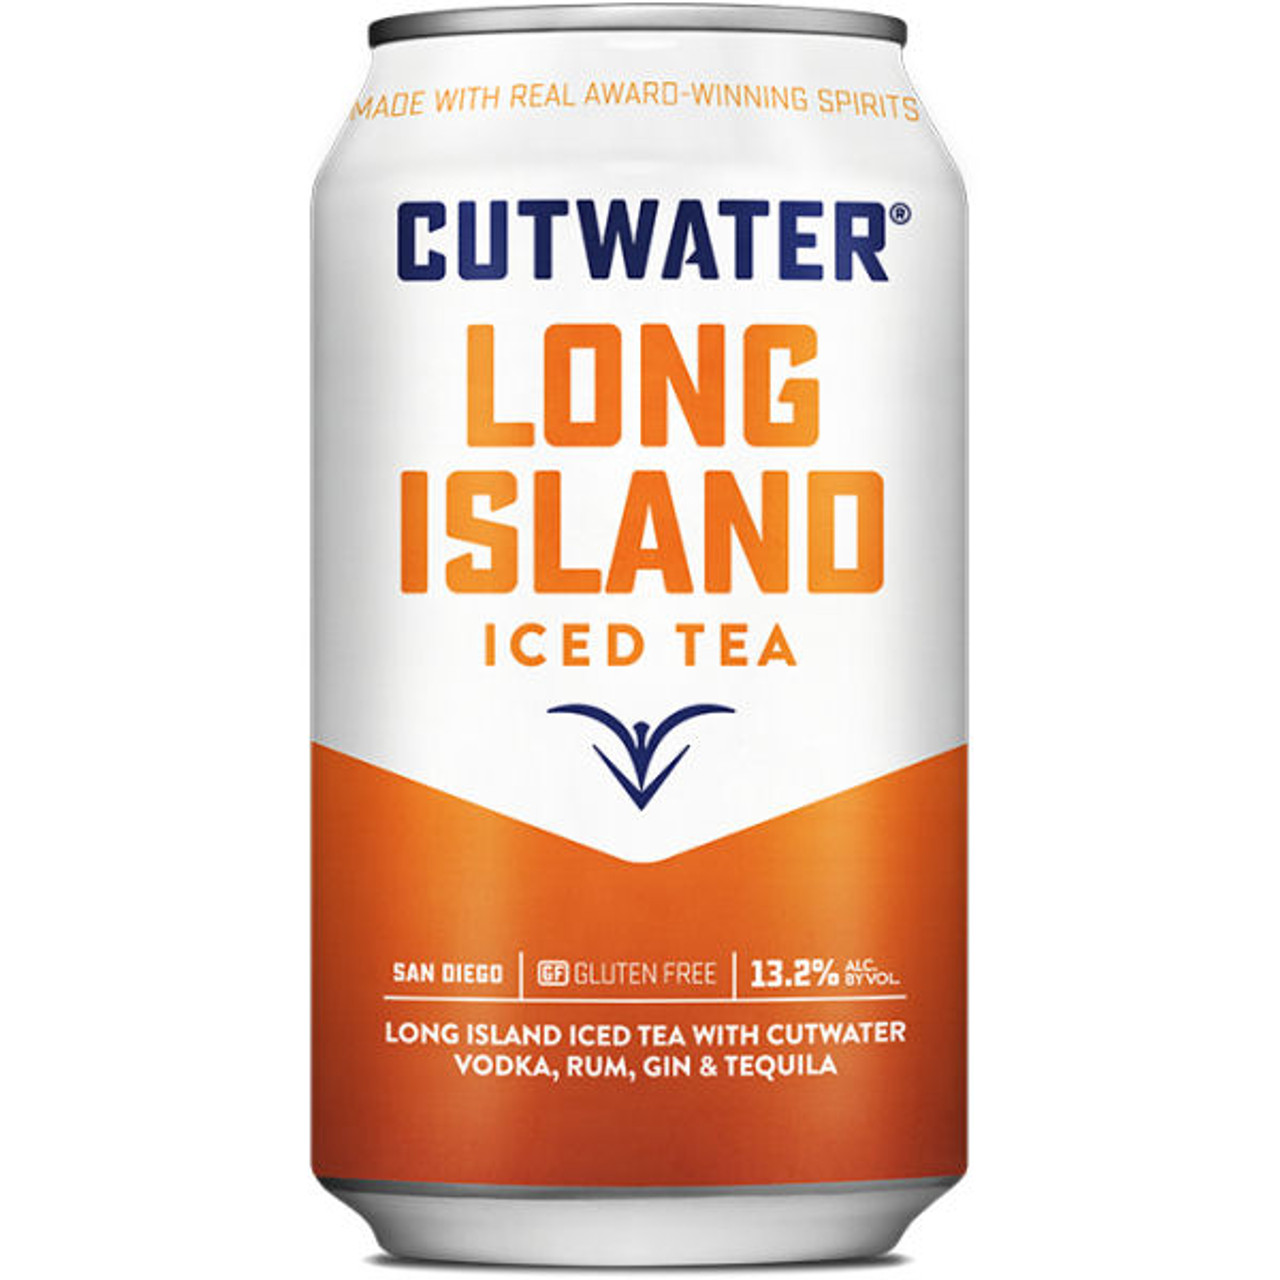 https://cdn11.bigcommerce.com/s-a04d0/images/stencil/1280x1280/products/19550/21347/cutwater-spirits-long-island-iced-tea-ready-to-drink__21138.1697454744.jpg?c=2